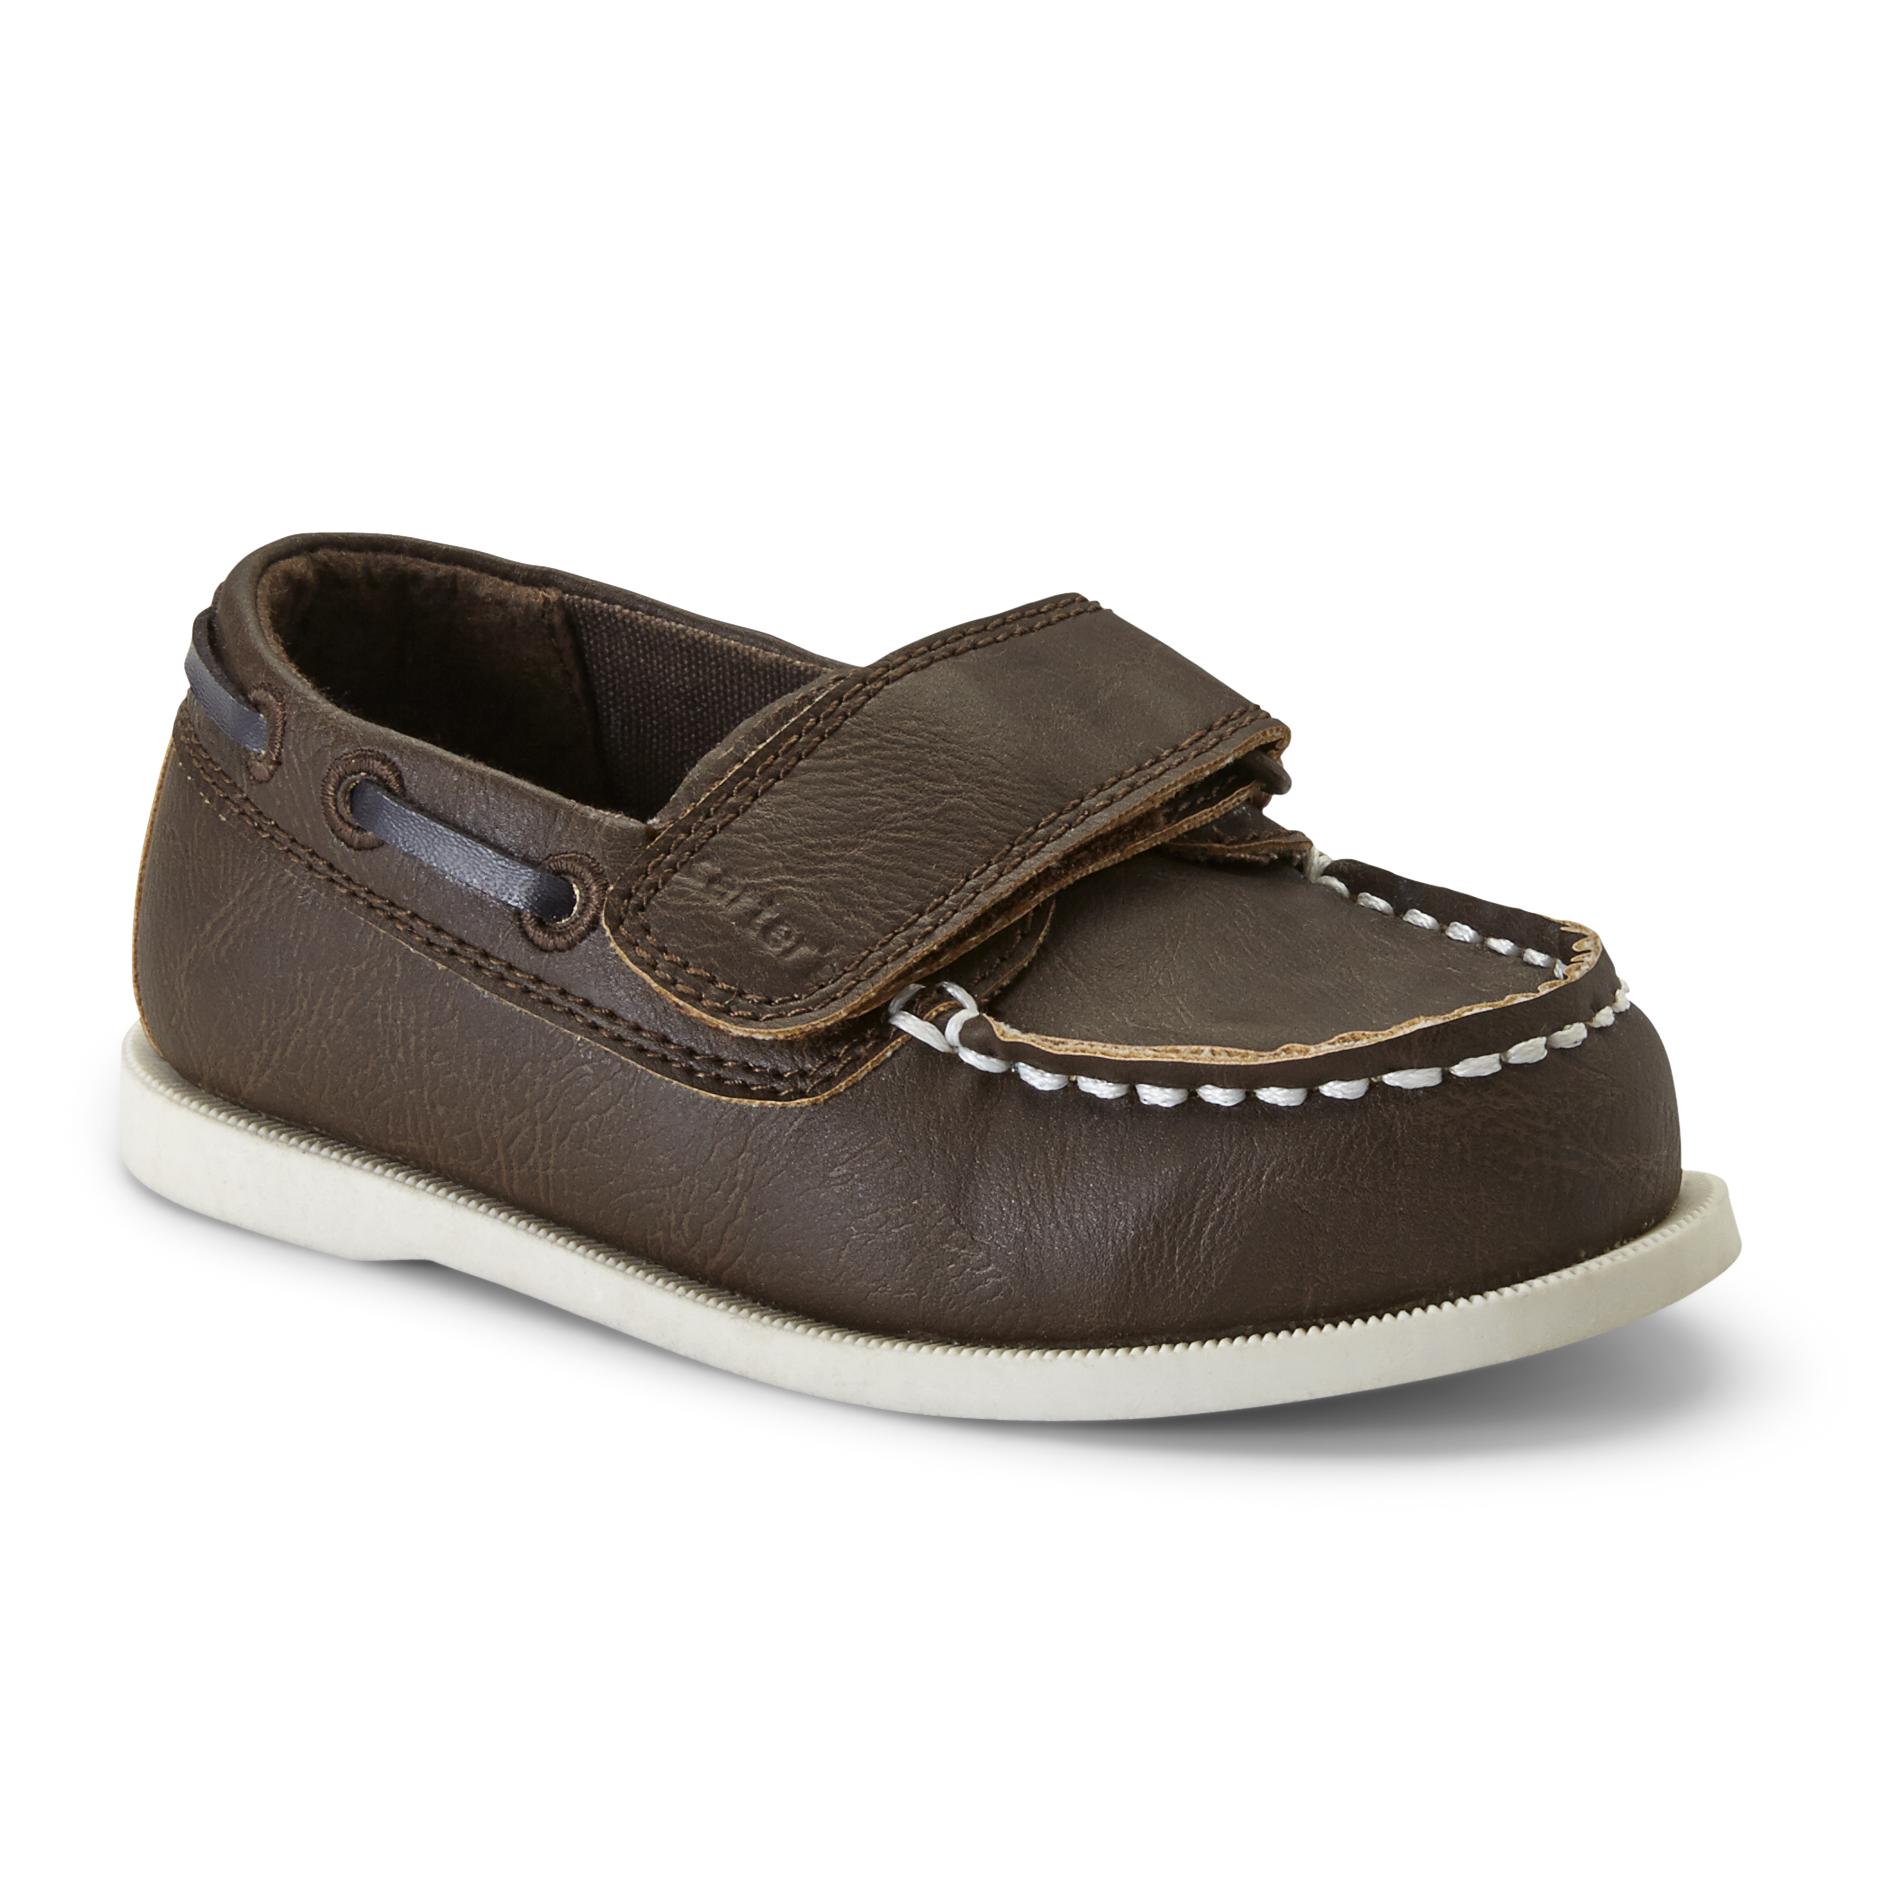 Carter's Toddler Boy's Archie 2 Brown Boat Shoe